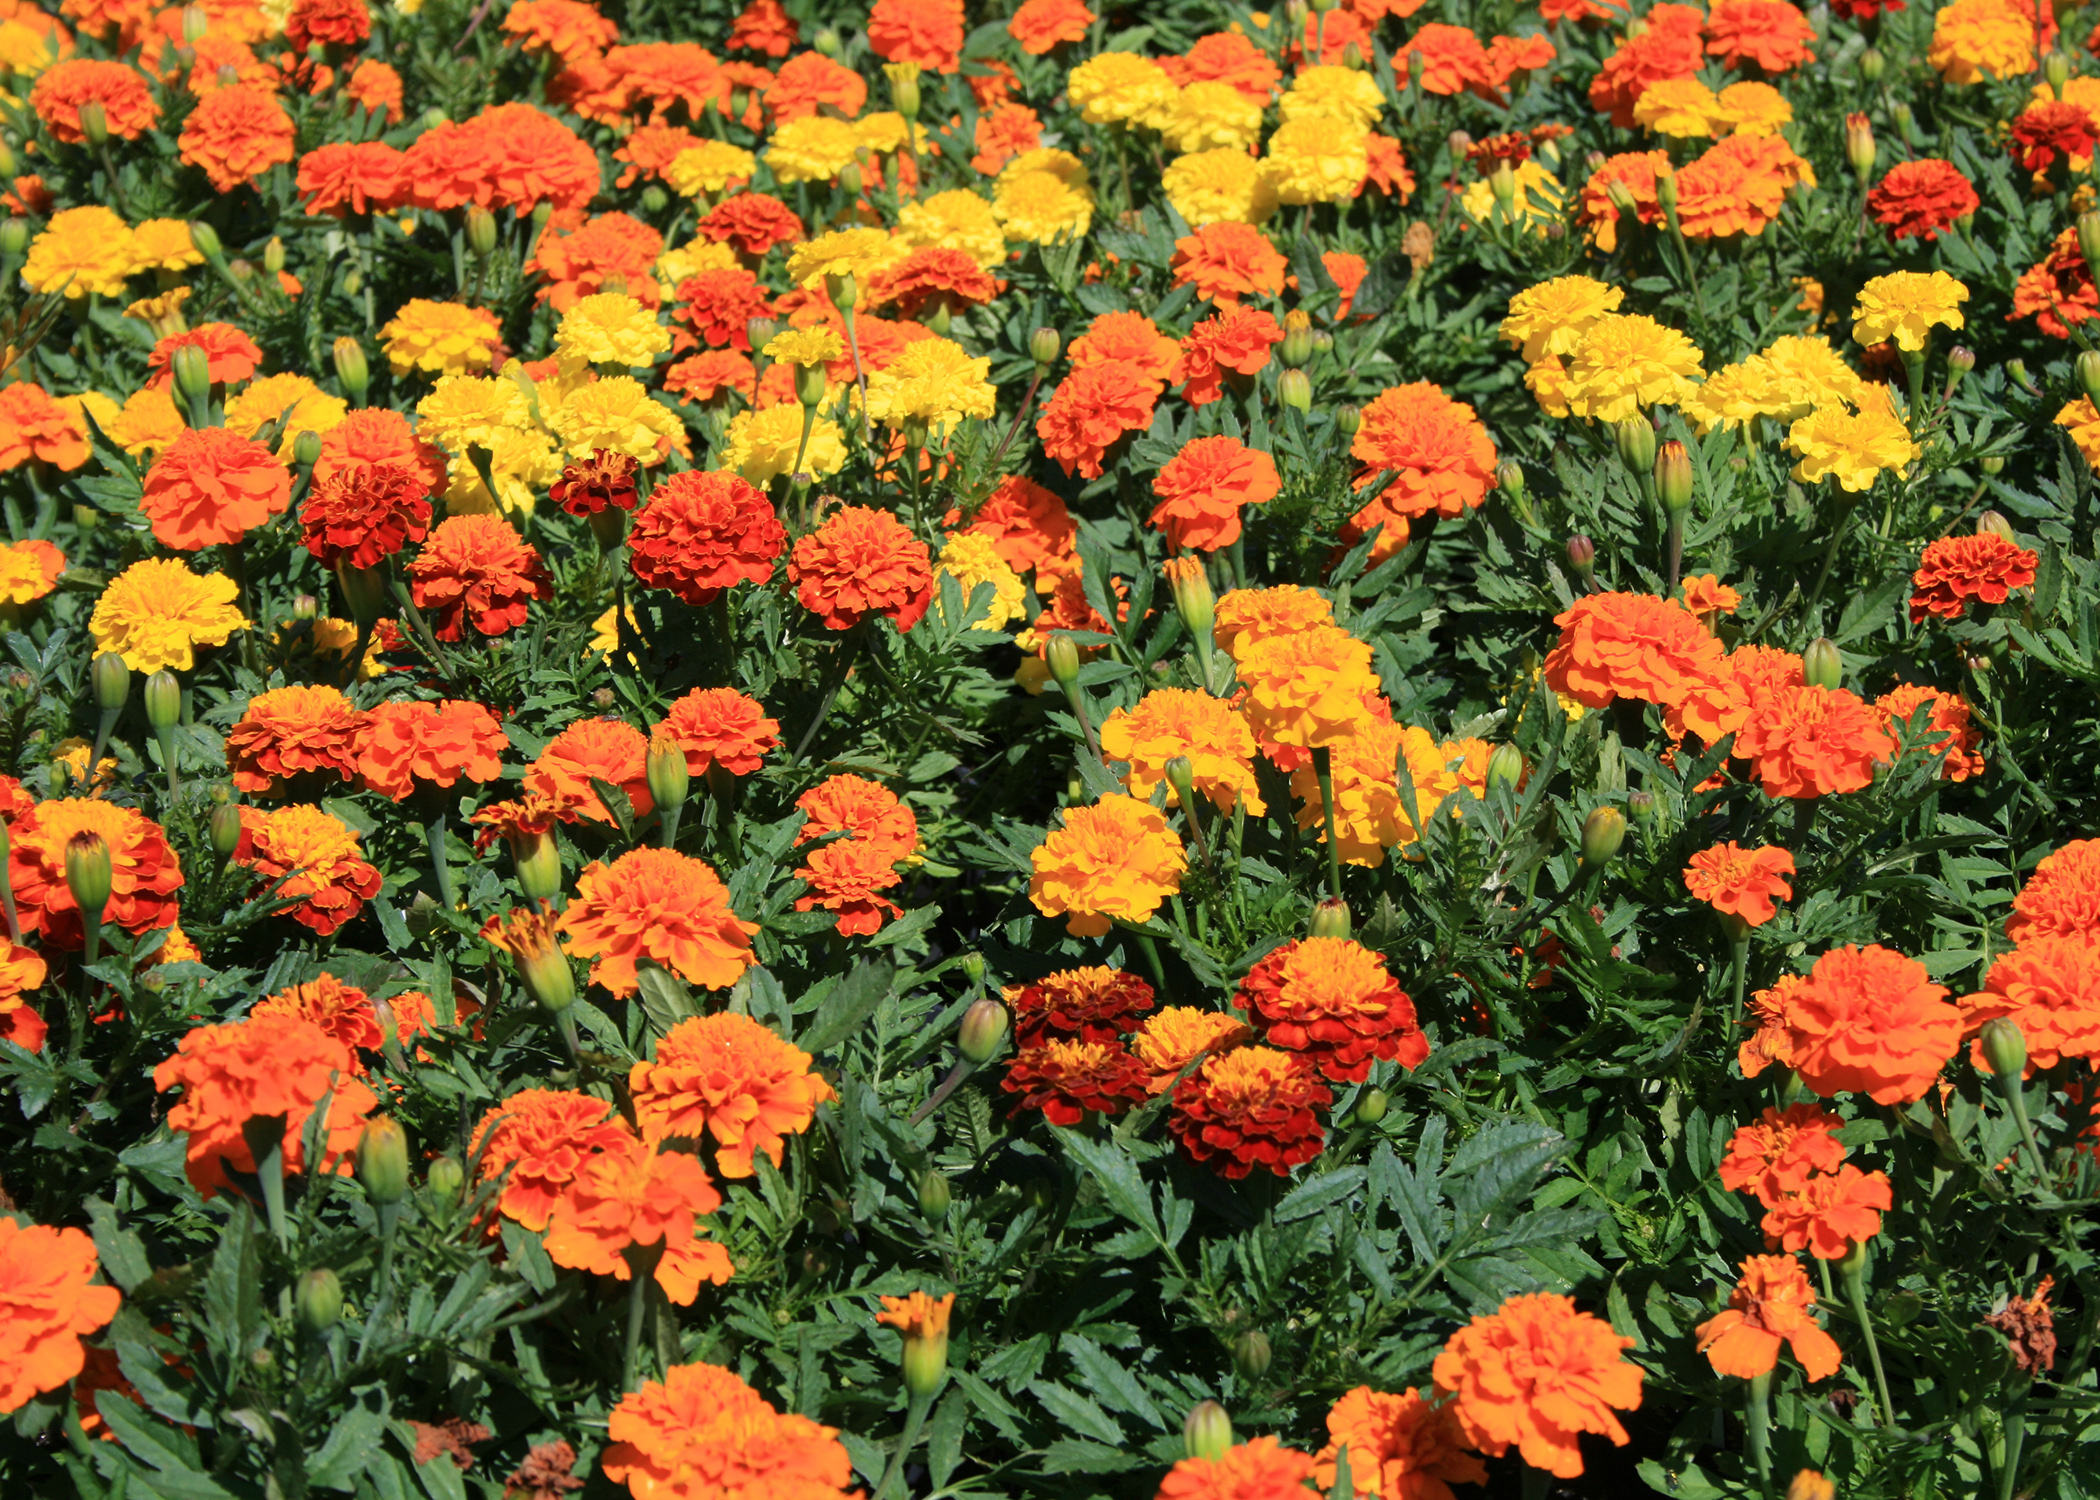 Also called the African marigold, various series of the American marigold can range from 15 inches to 3 feet in height. (Photo by MSU Extension Service/Gary Bachman)